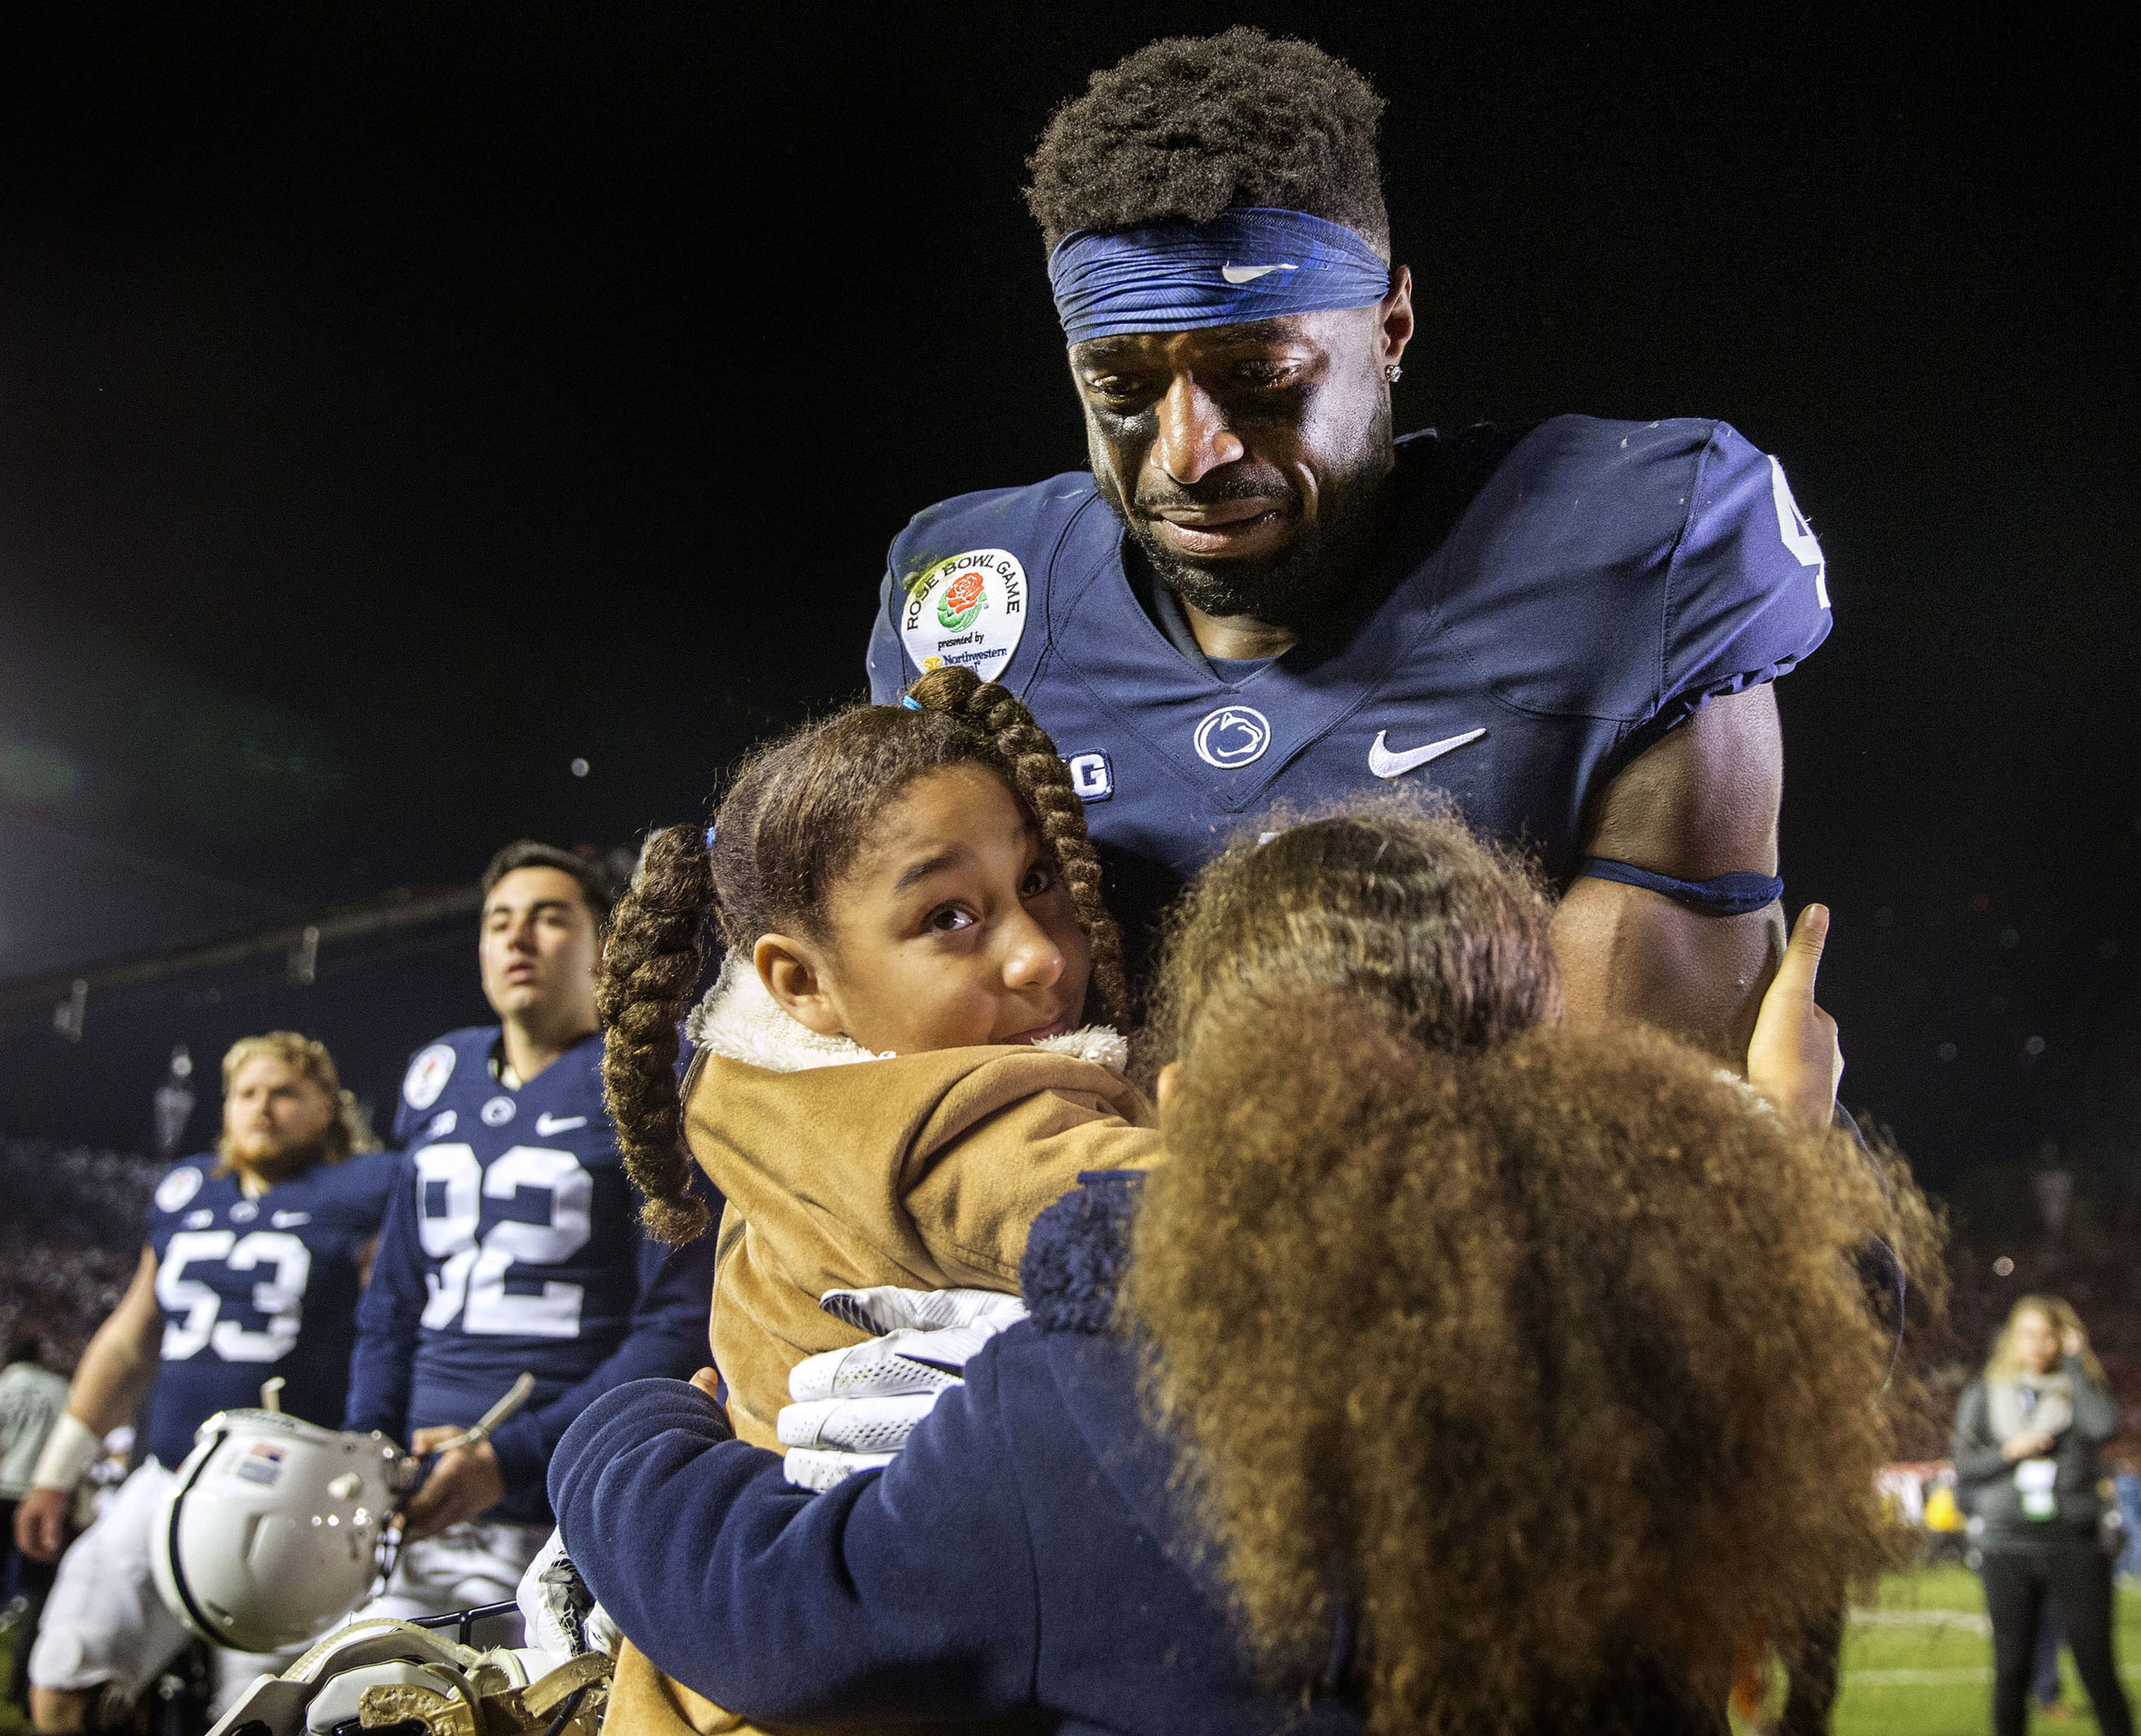  Addy and Shola Franklin hug Penn State's Nick Scott after USC defeated the Nittany Lions 52-49 in the Rose Bowl game in Pasadena, CA on Monday, Jan. 2, 2017. 